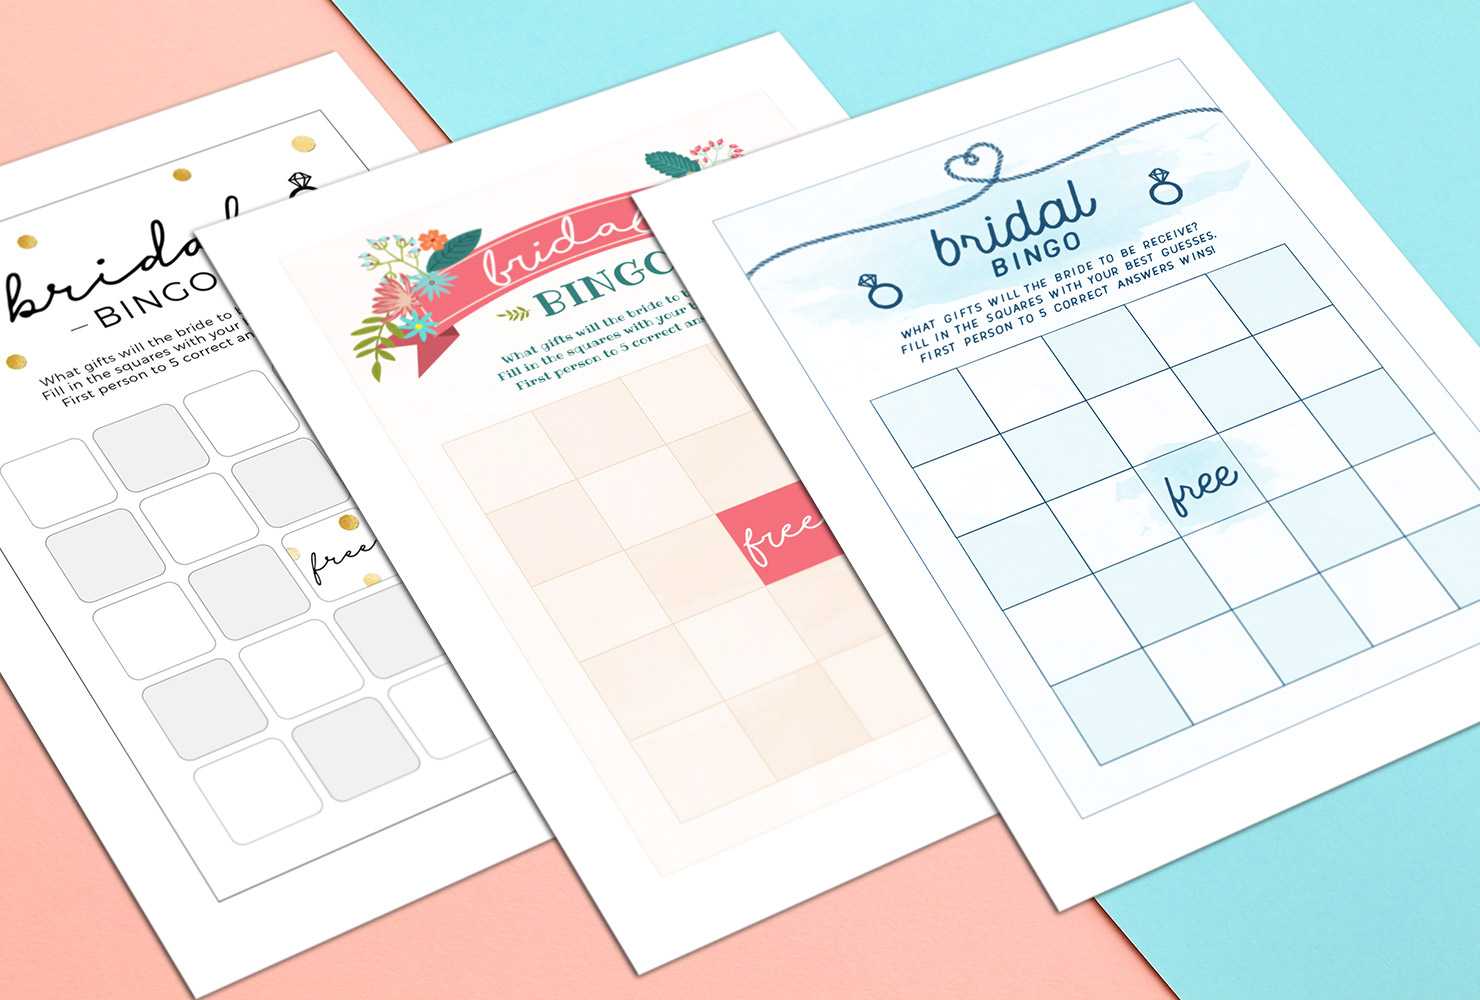 How To Play Bridal Shower Bingo (With Printables) | Shutterfly Throughout Blank Bridal Shower Bingo Template